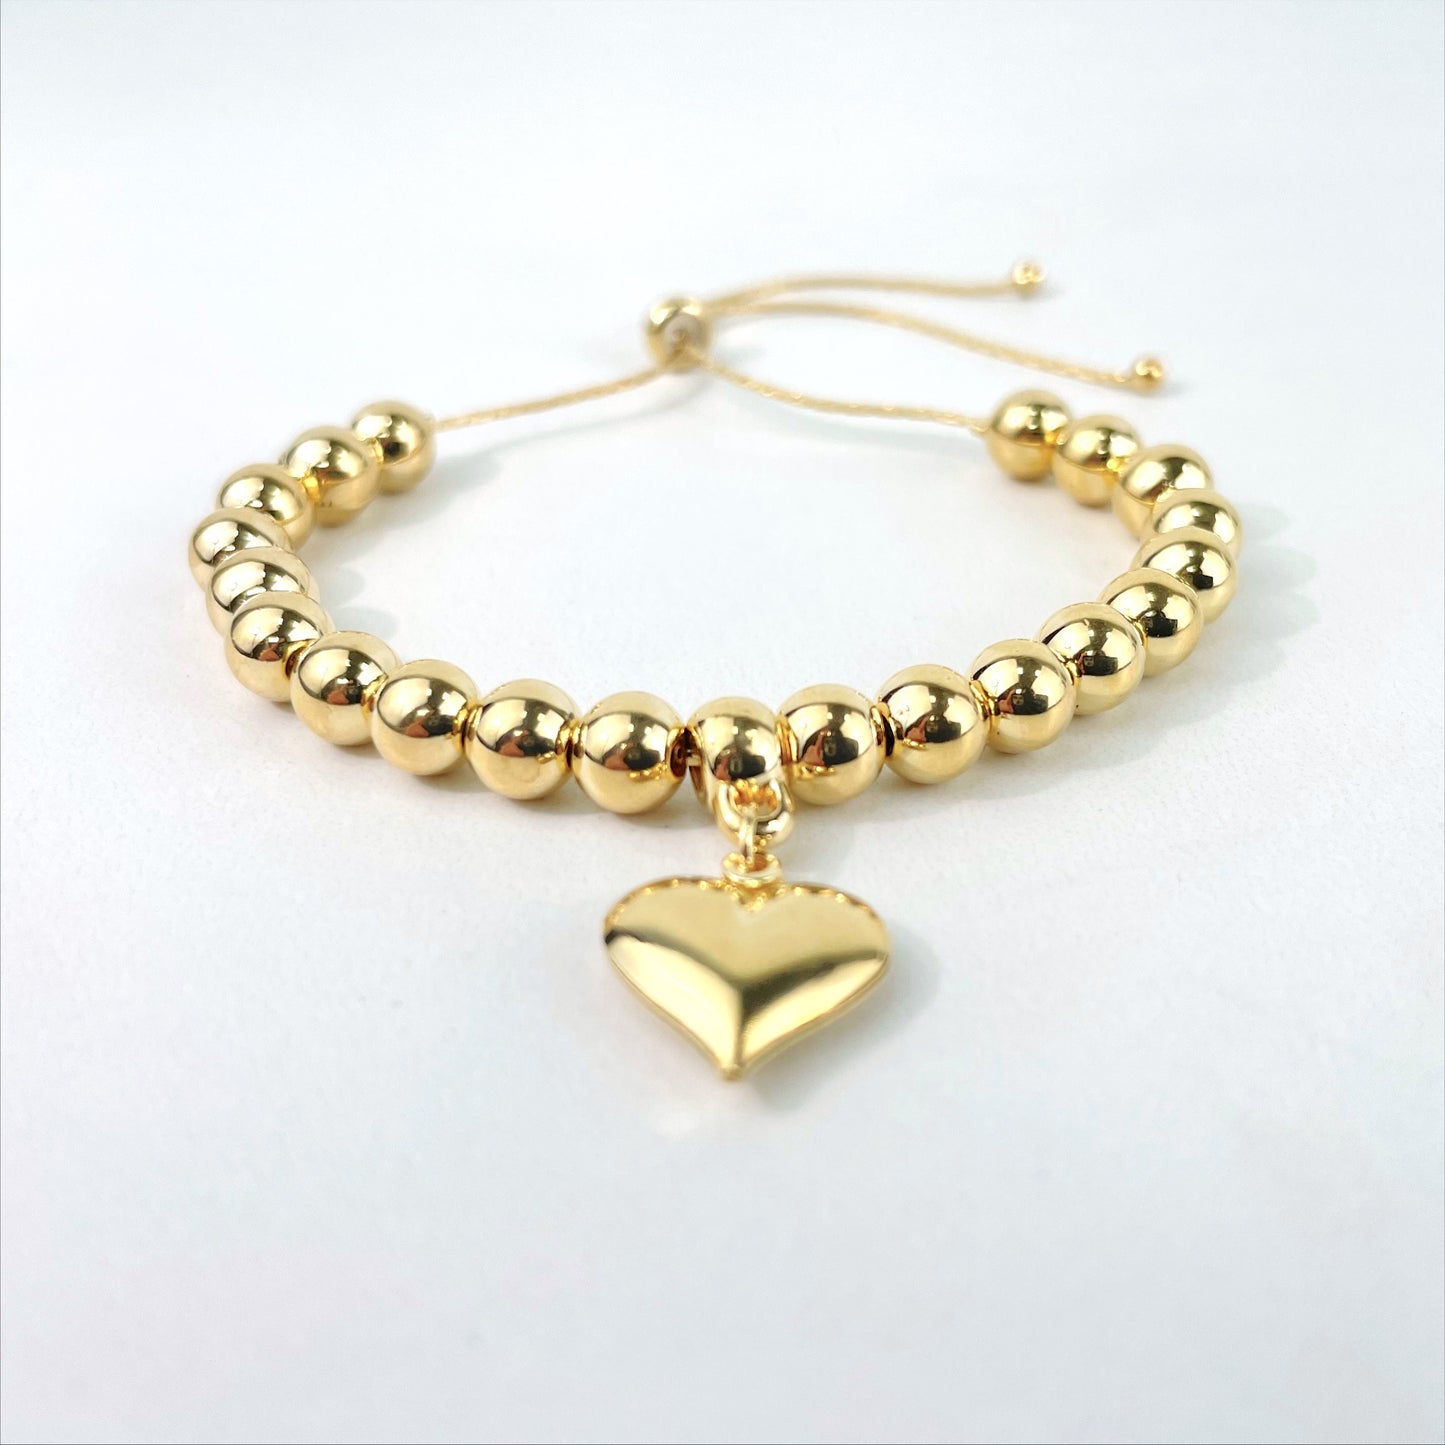 18k Gold Filled 1mm Snake Chain, Beaded Bracelet with Heart Charms, Adjustable Bracelet, Wholesale Jewelry Supplies